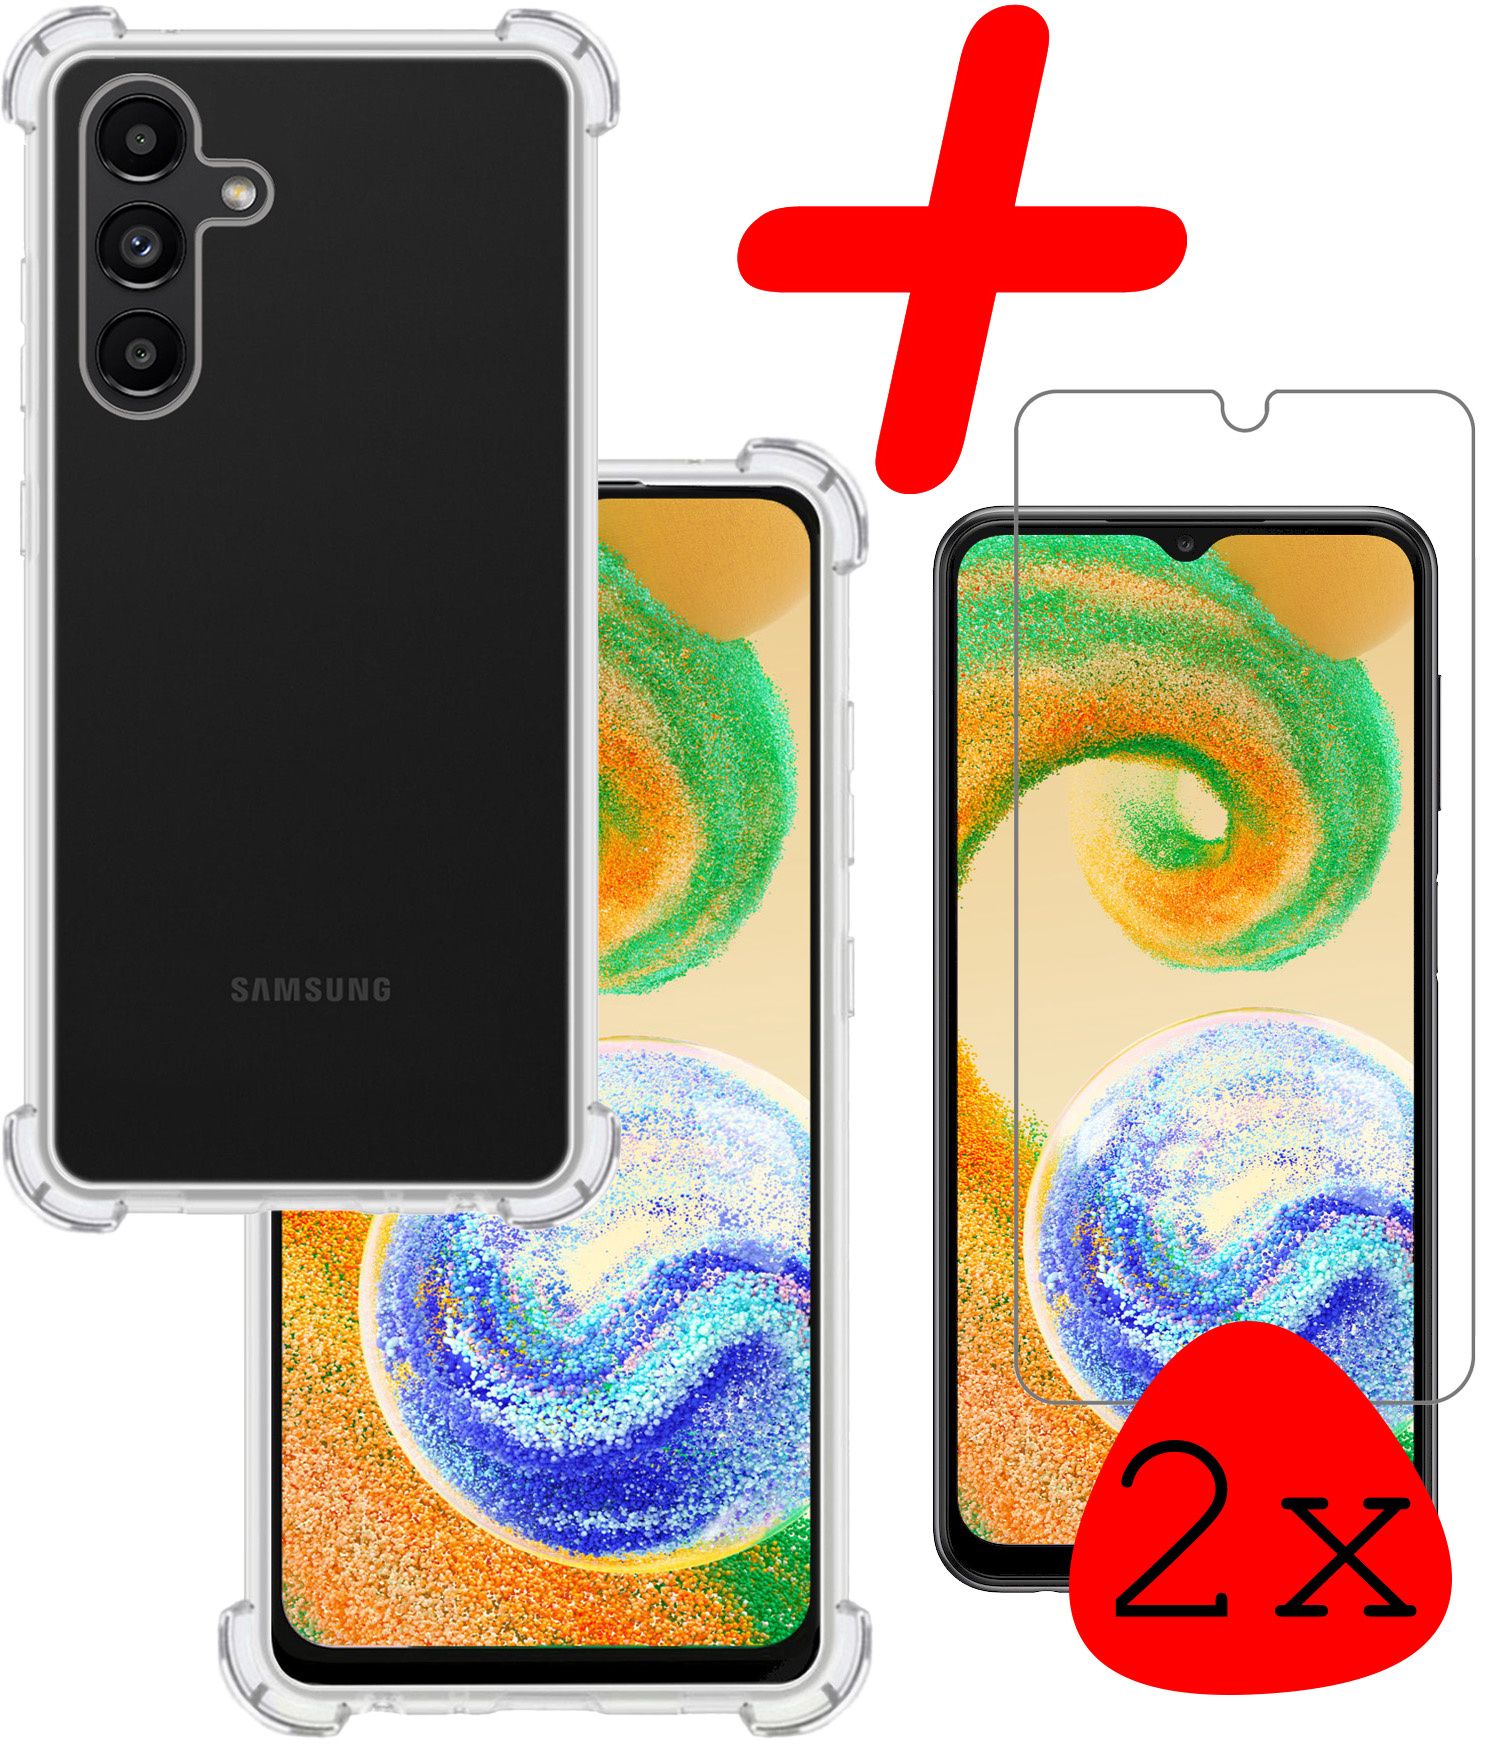 BASEY. Samsung Galaxy A04s Hoesje Shock Proof Met 2x Screenprotector Tempered Glass - Samsung Galaxy A04s Screen Protector Beschermglas Hoes Shockproof - Transparant